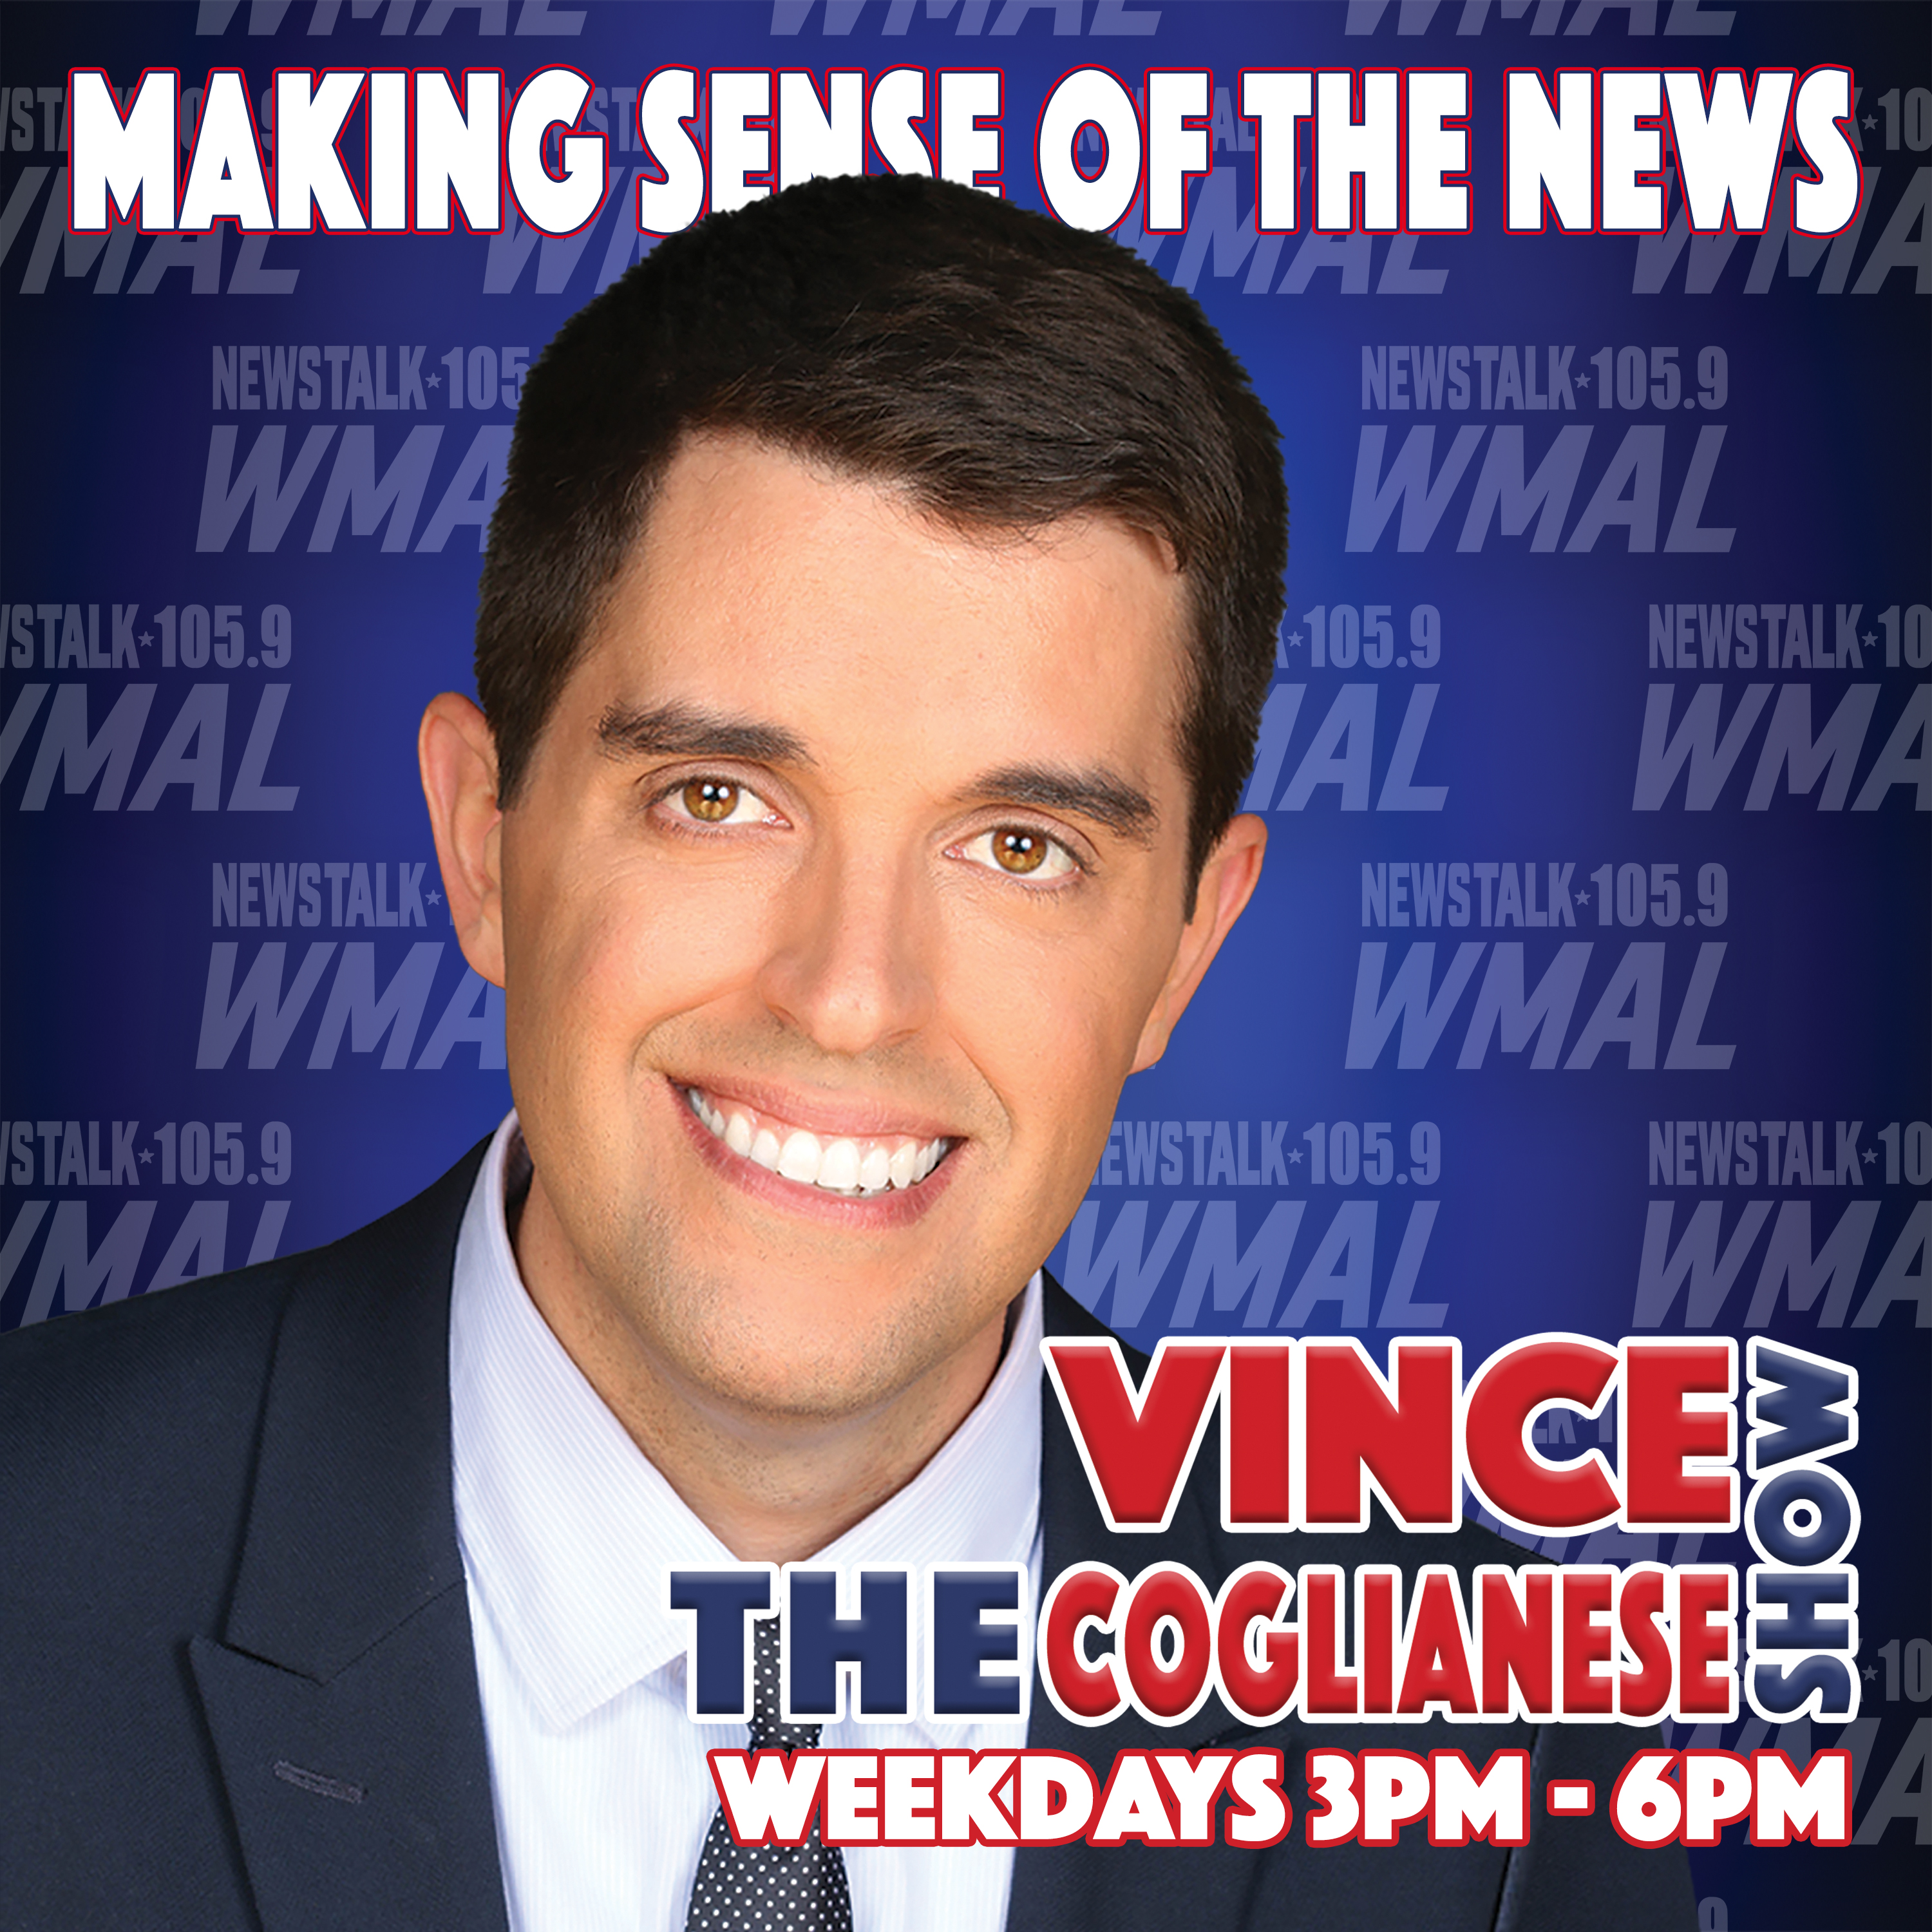 The Vince Coglianese Show - Dr. Marc Seigal - 07.28.21